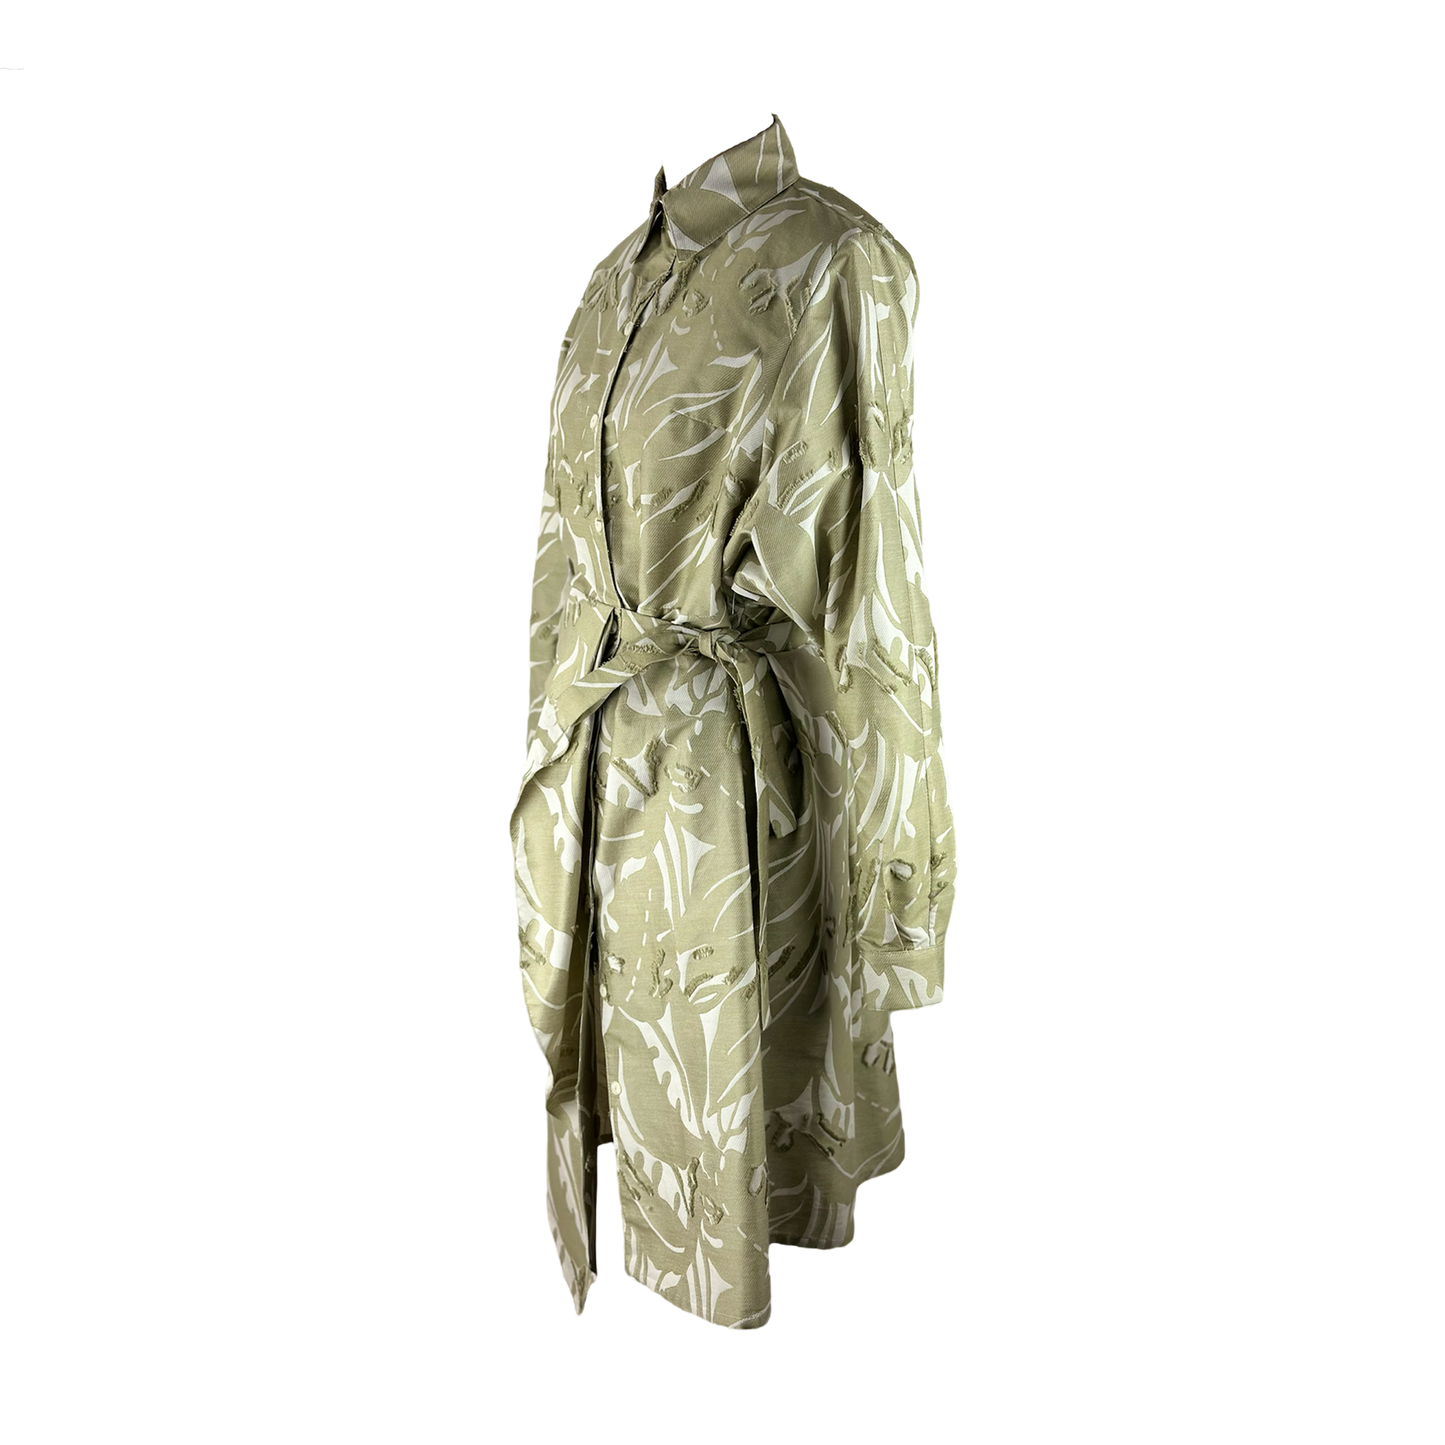 Side of Seige shirt dress with an eye-catching beige leaf print, with unusual drape detail in front and kimono-style sleeves